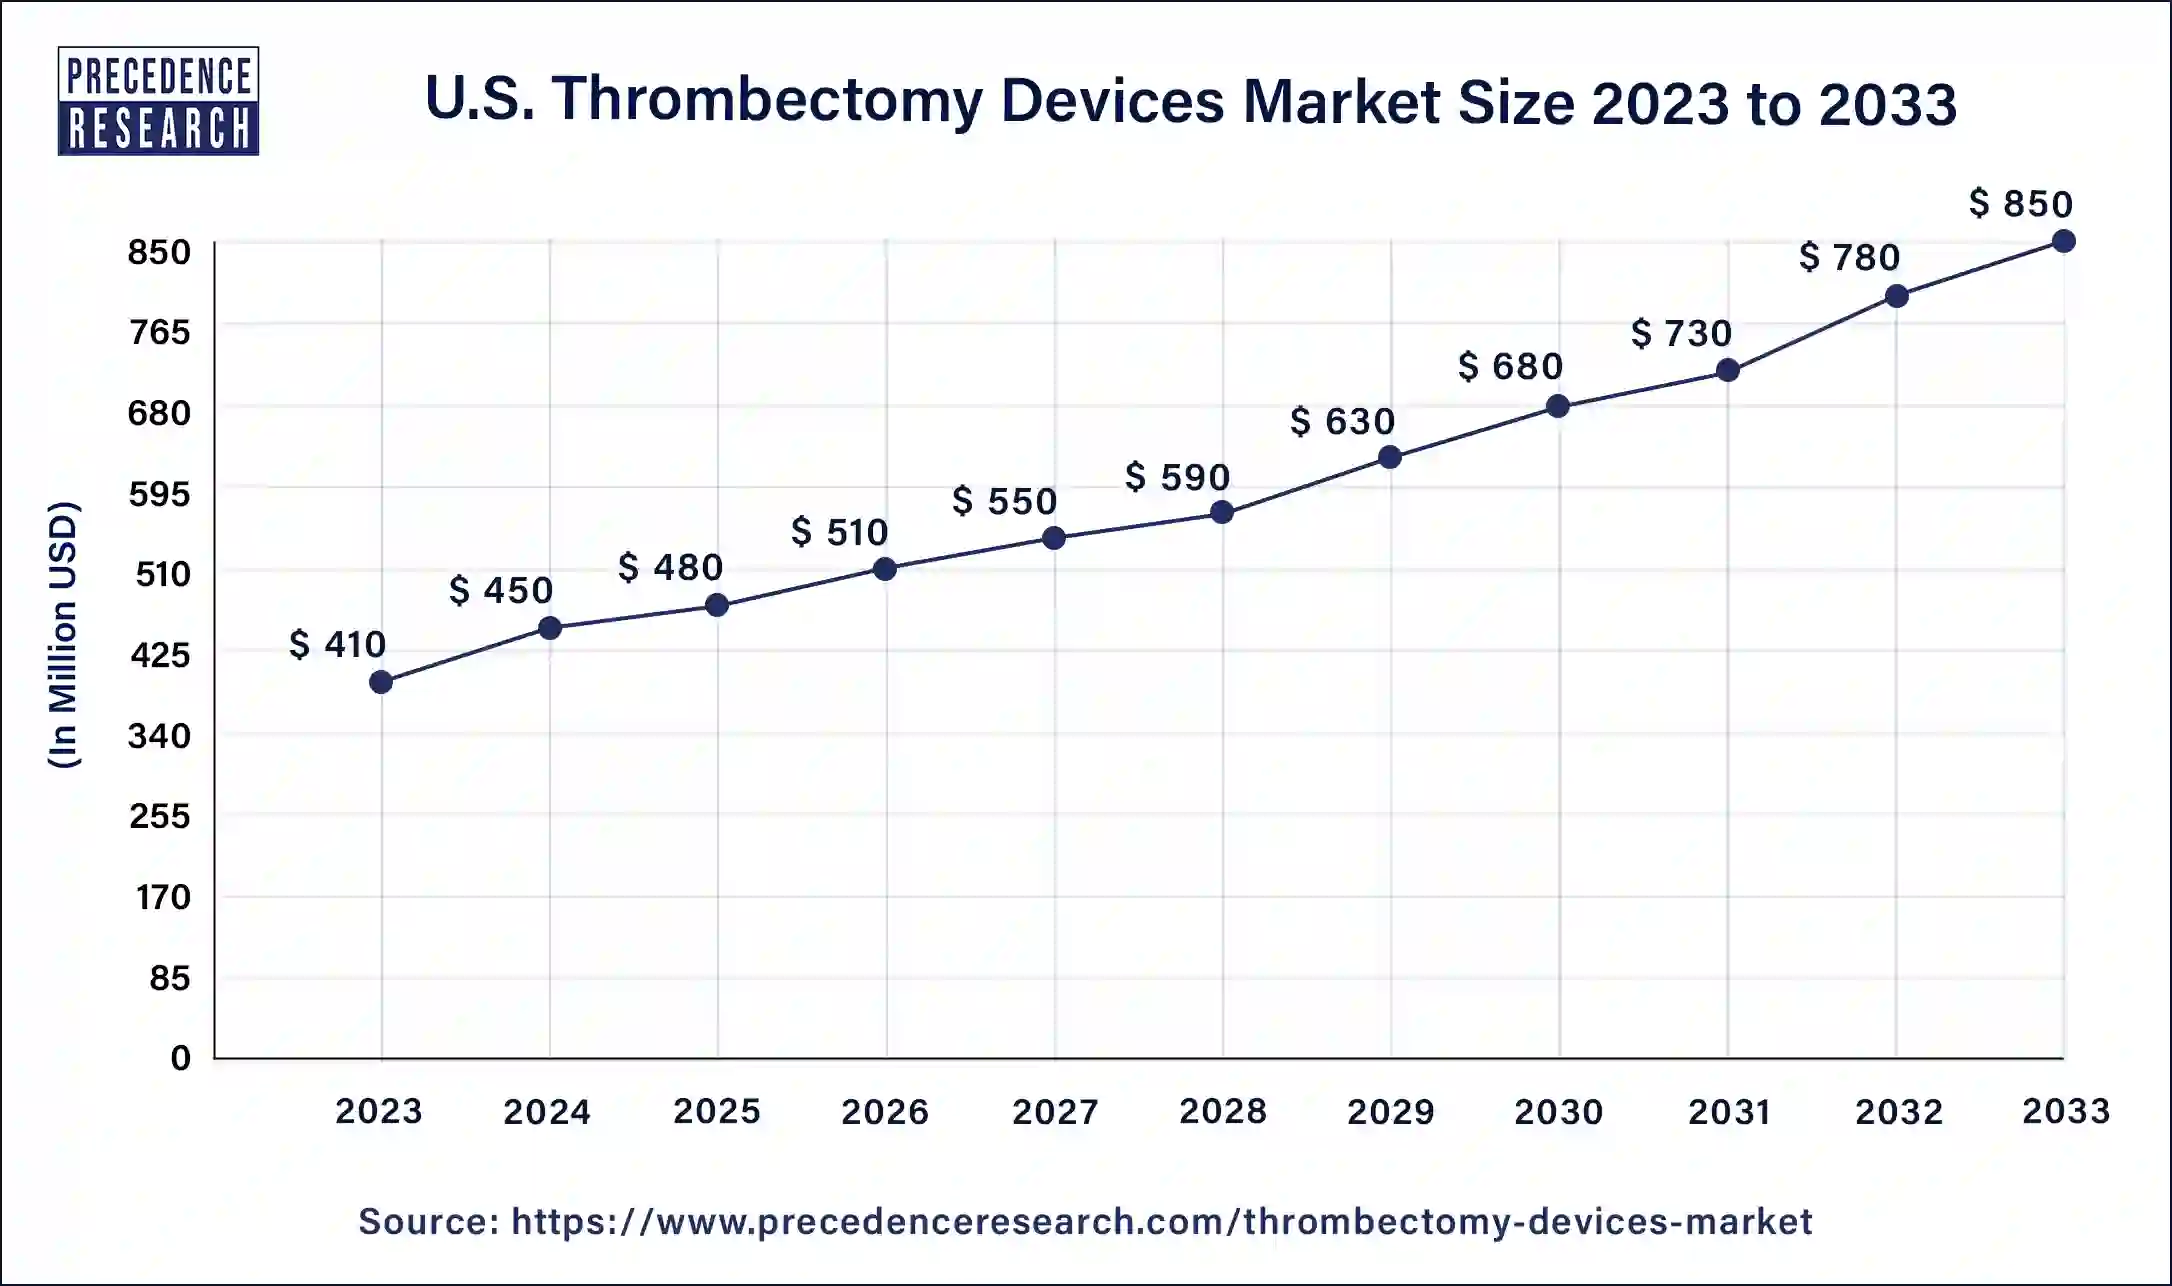 U.S. Thrombectomy Devices Market Size 2024 to 2033